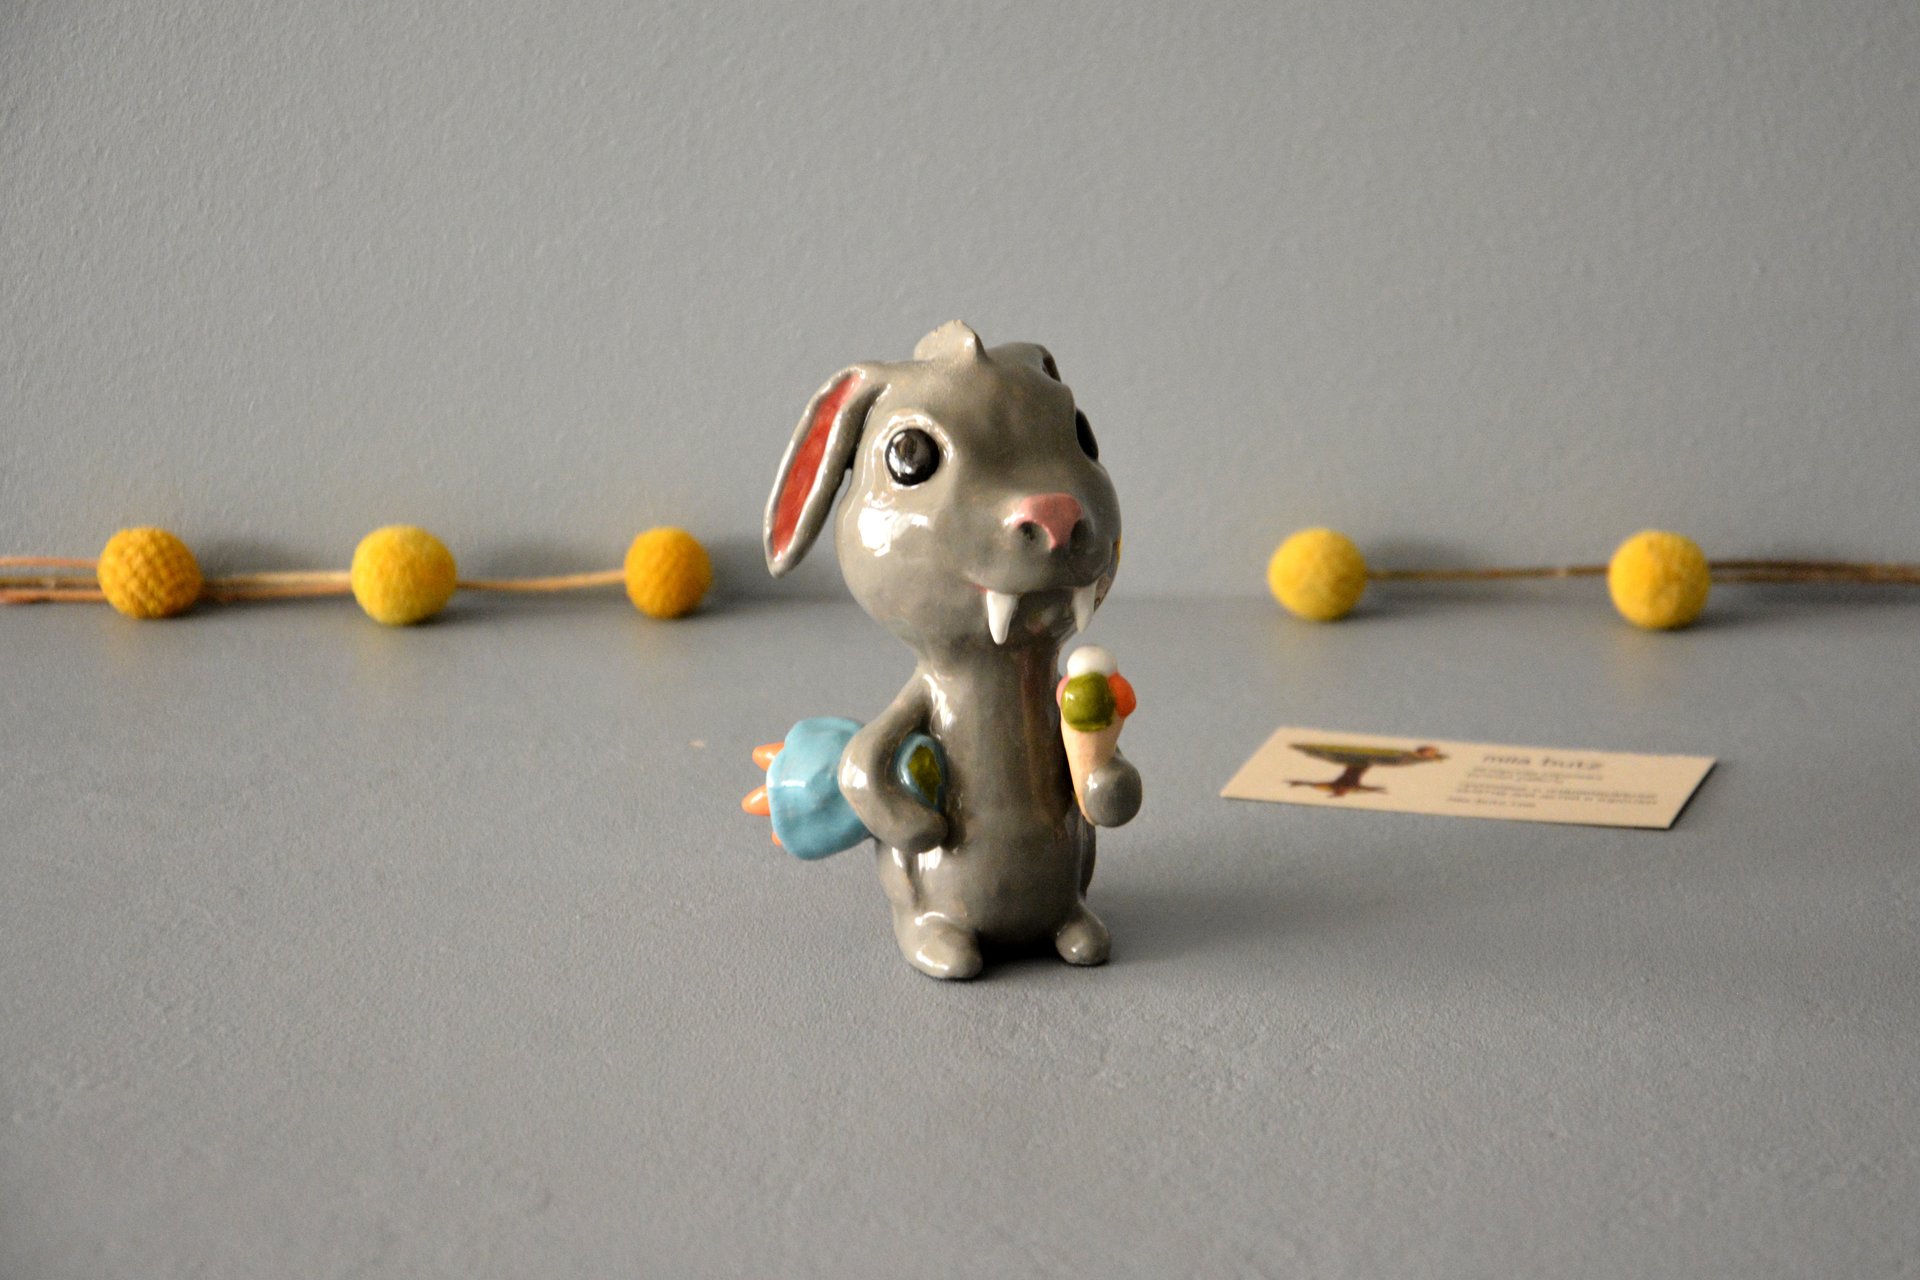 Clay figurine Saber-toothed Rabbit, height - 12 cm, photo 1 of 5.